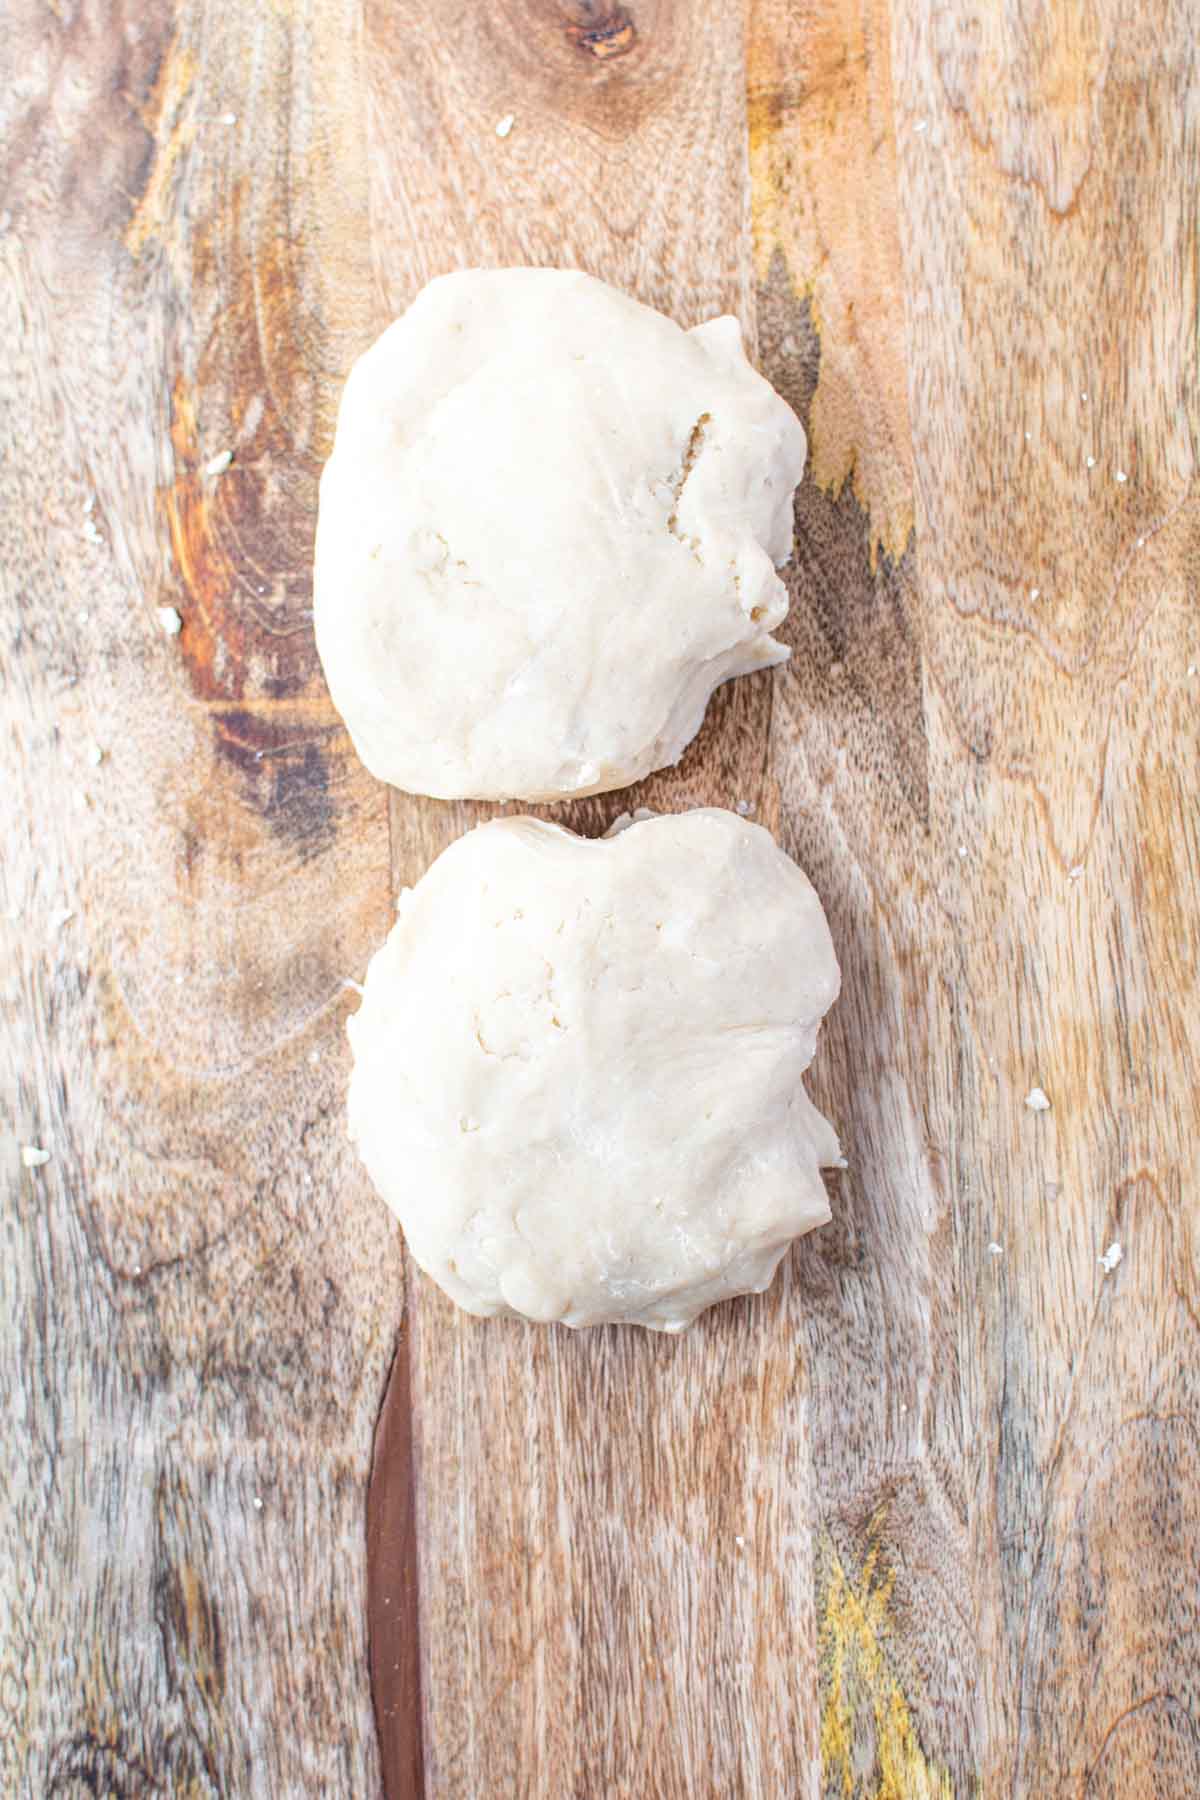 Two balls of dough for a flaky pie crust